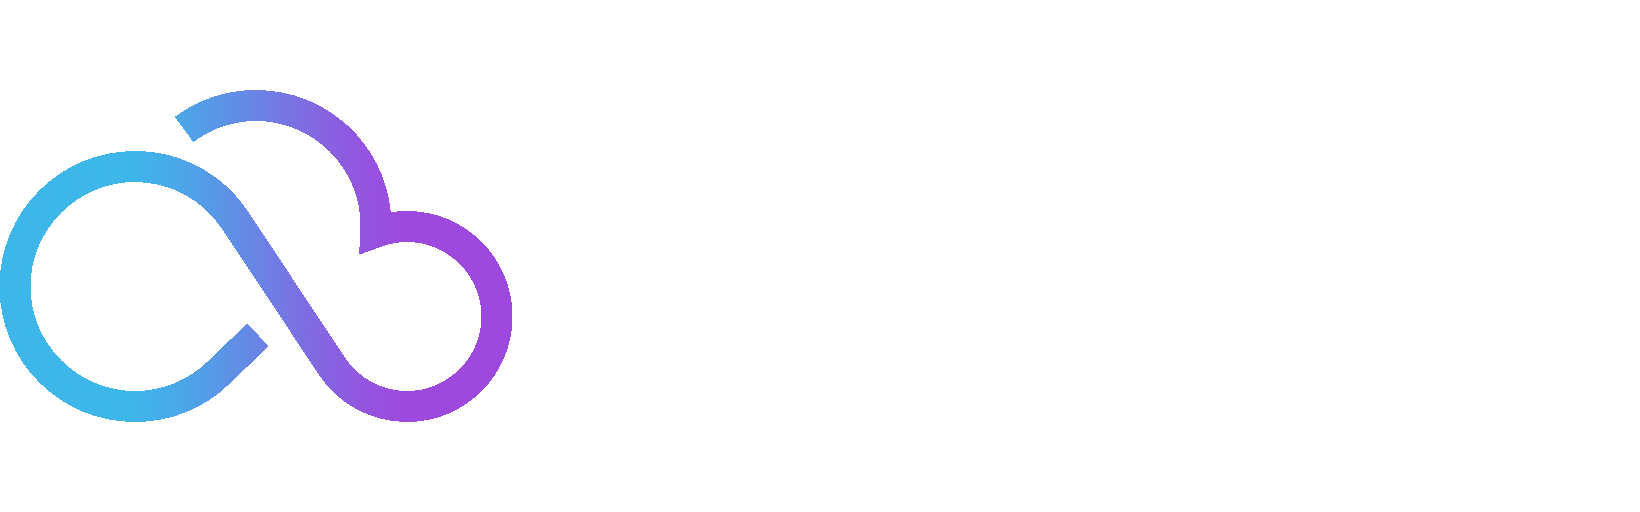 dundee web design cloud1337 white